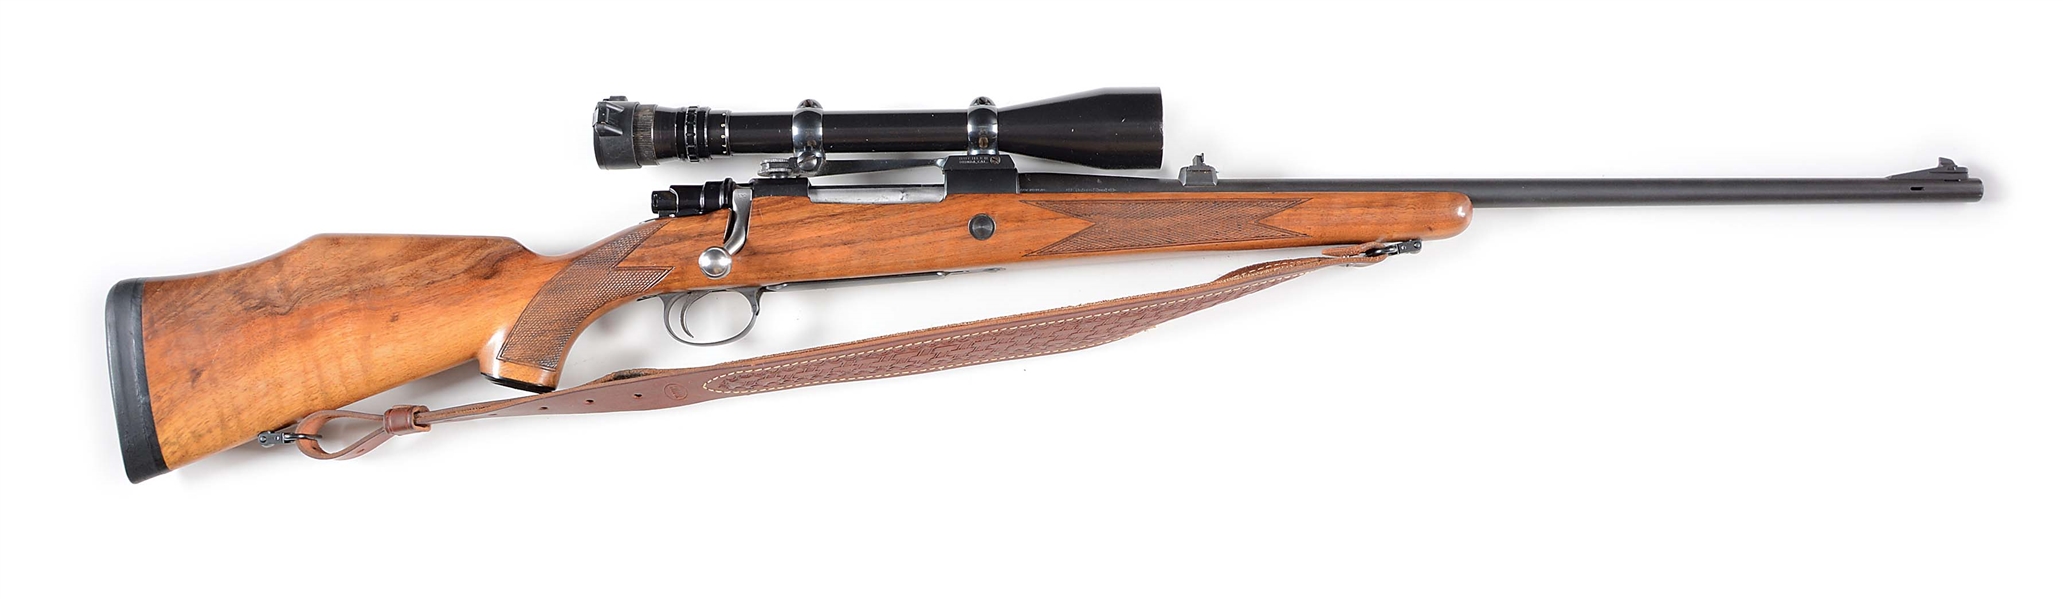 (M) SAKO BOLT ACTION SPORTING RIFLE WITH SCOPE.